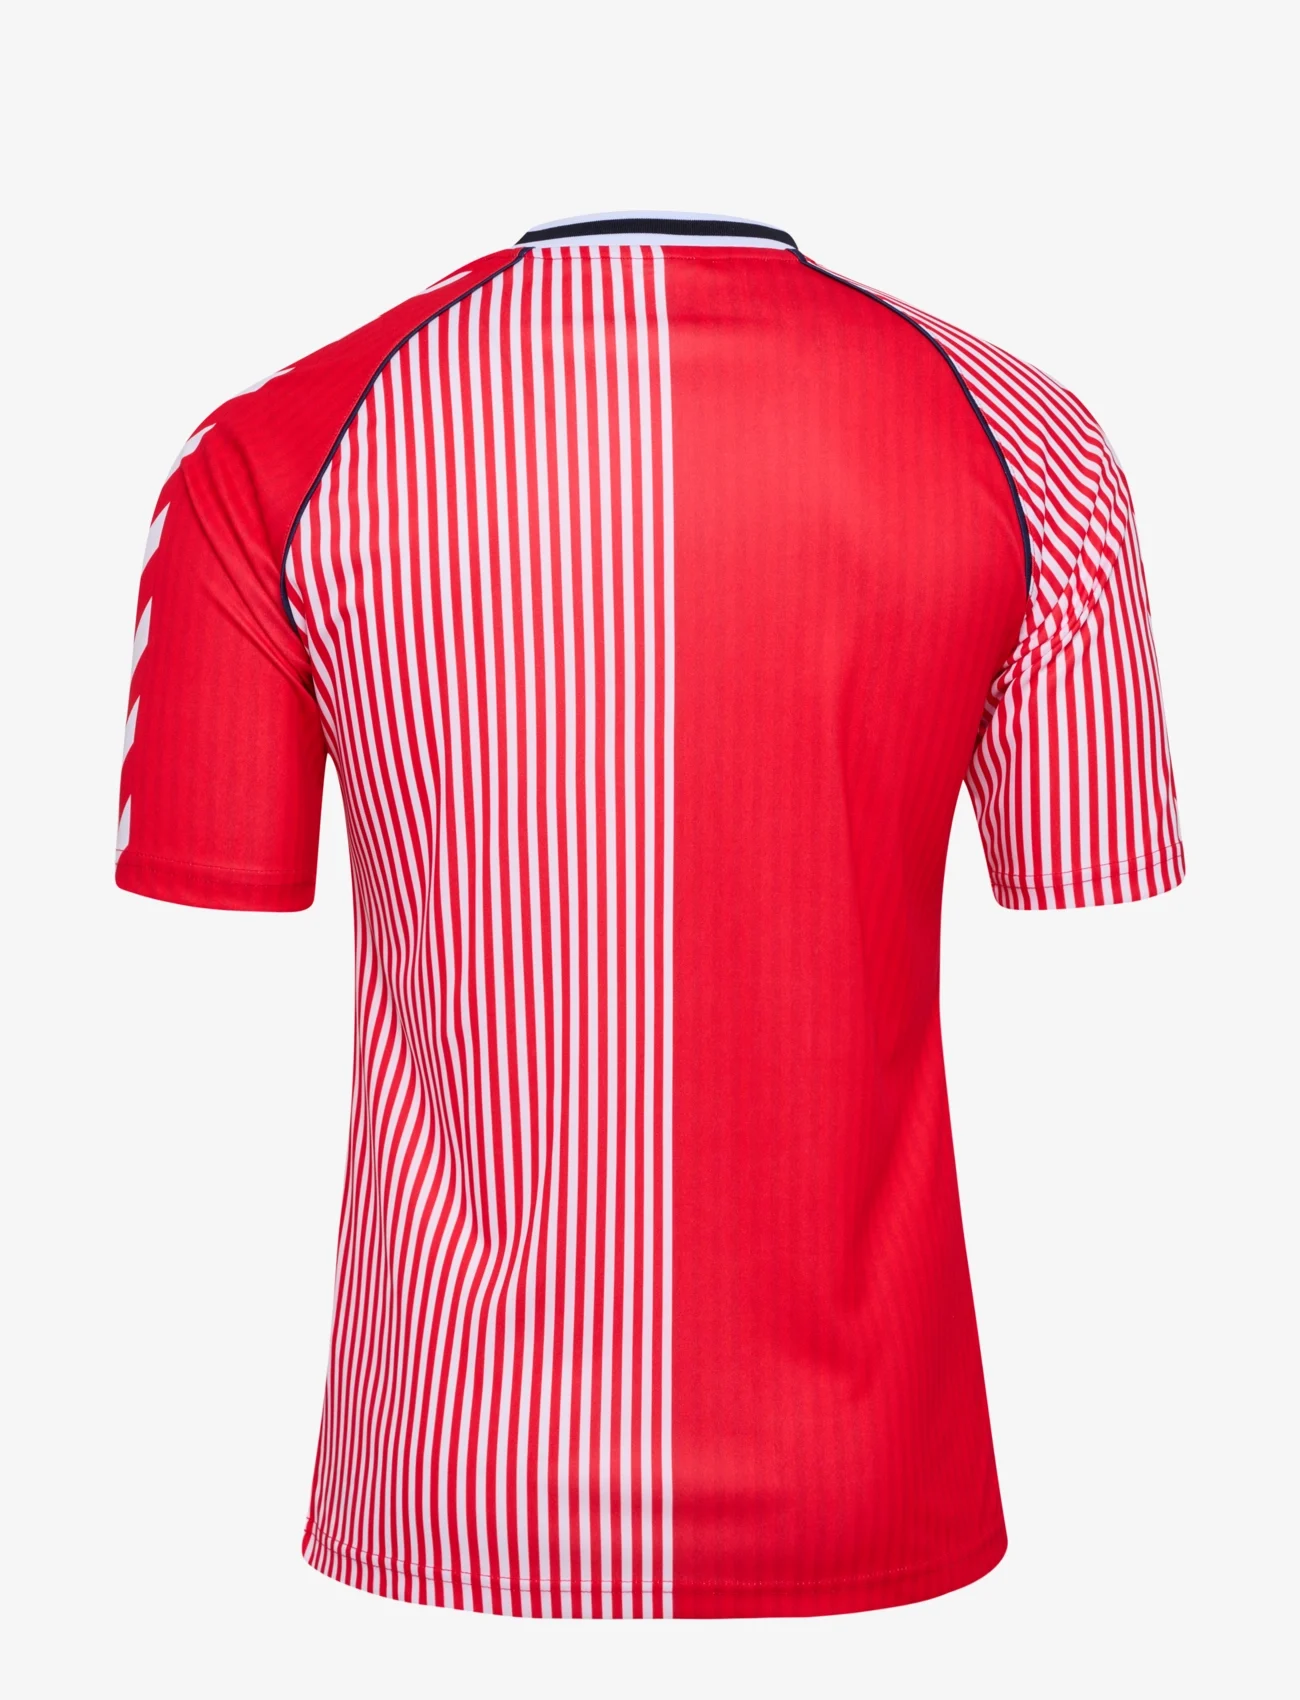 Hummel - DBU 86 REPLICA JERSEY S/S - voetbalshirts - red/white - 1